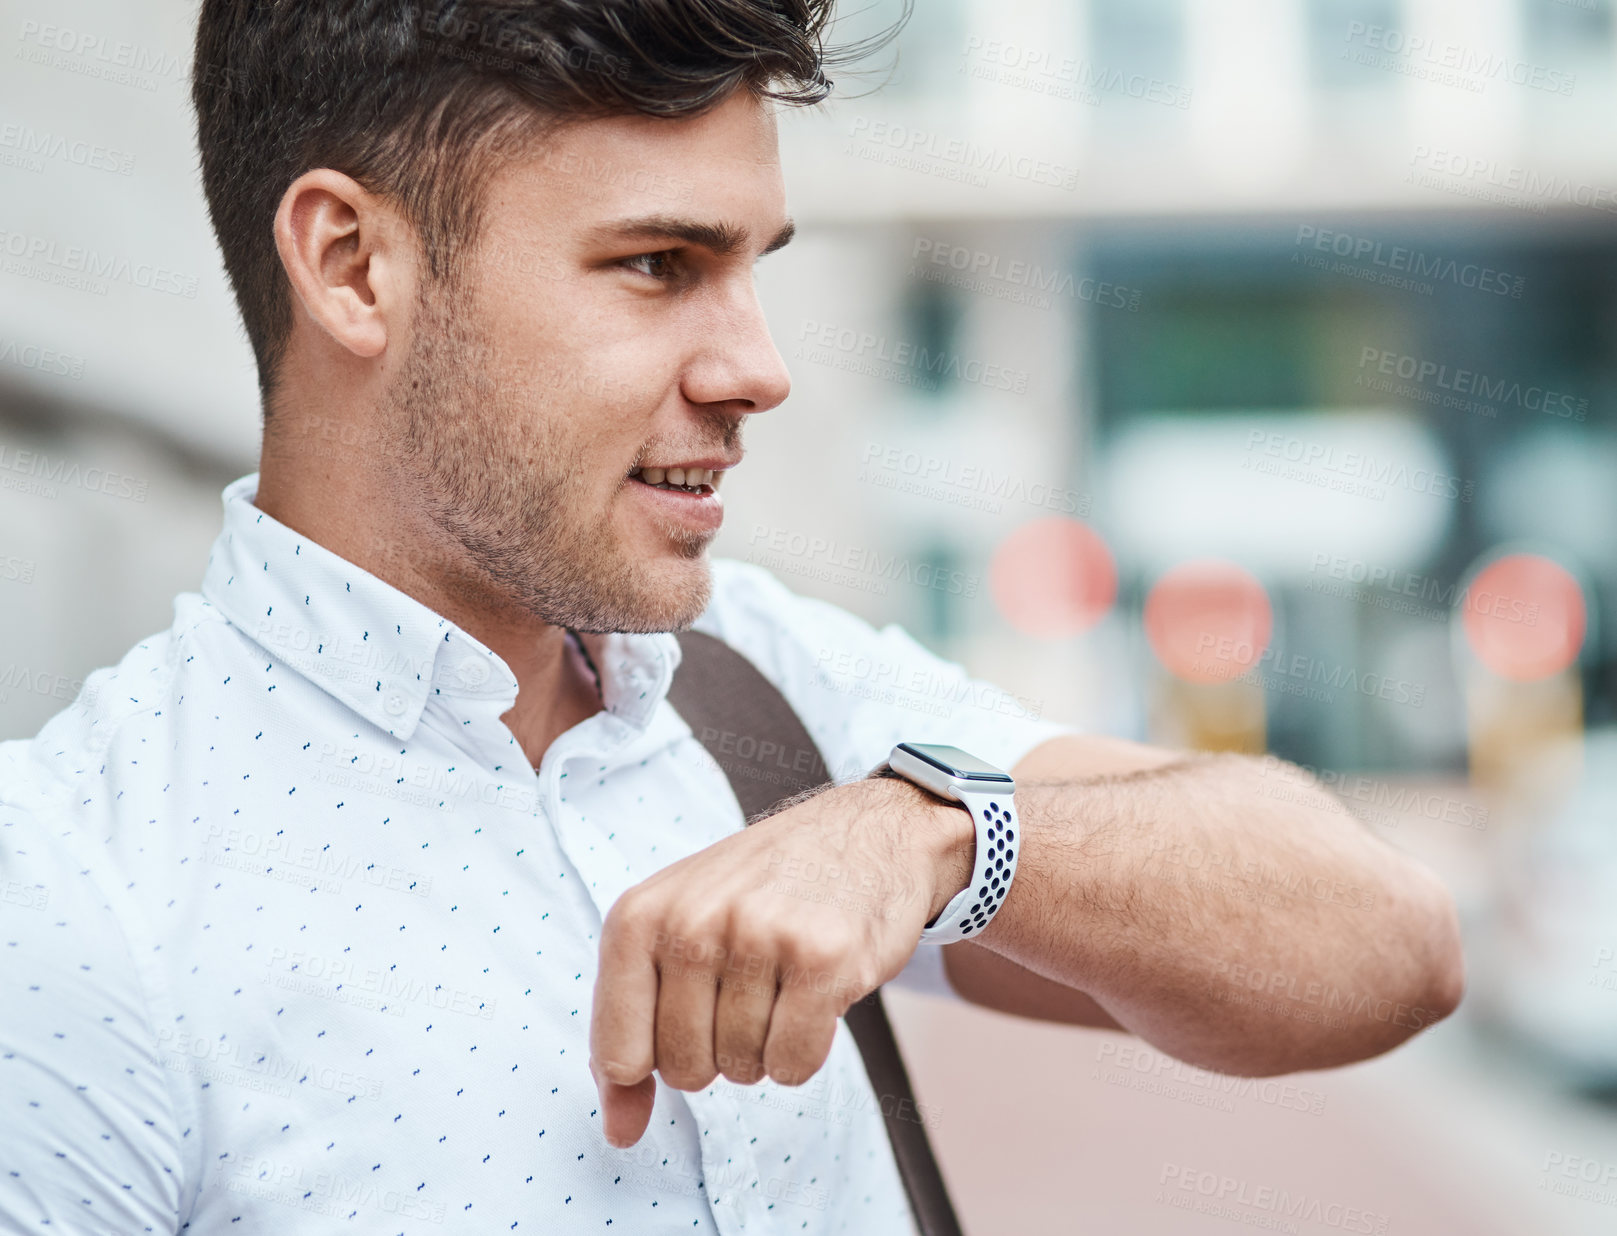 Buy stock photo Shot of a young businessman using a smartwatch against an urban background